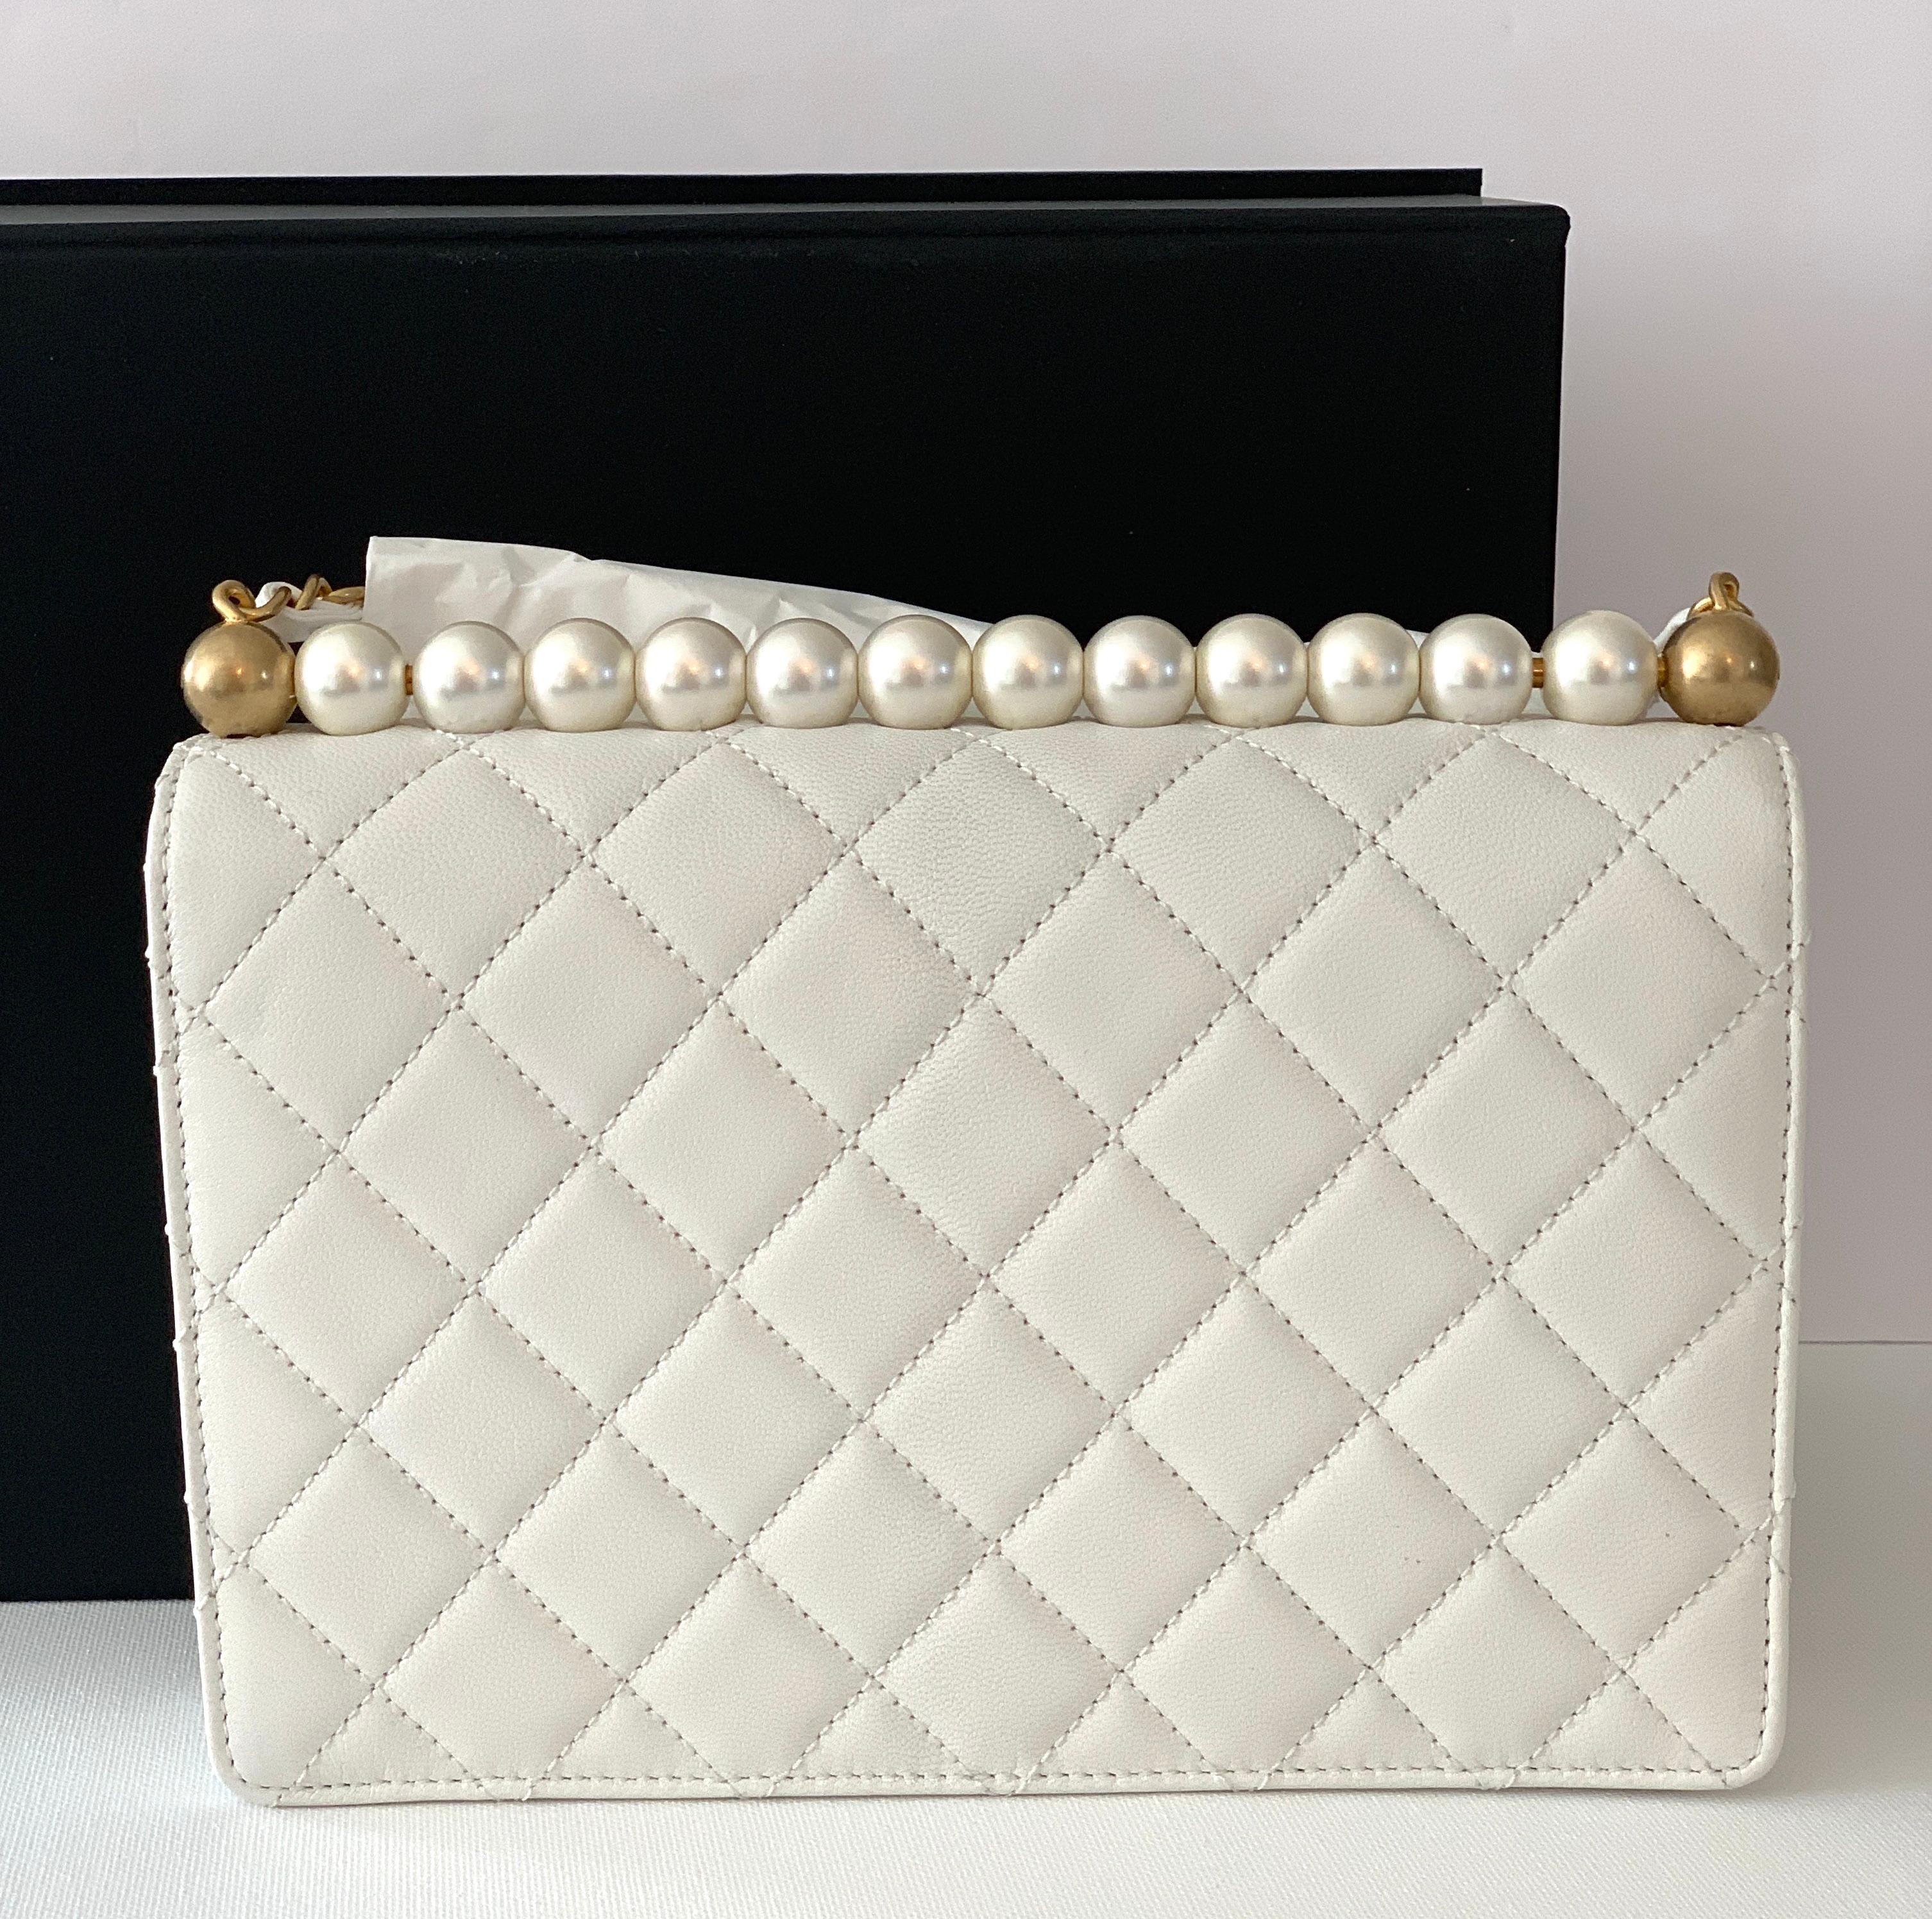 Women's or Men's Classic Small Flapbag Pearls Brush Gold White Goat Leather Shoulder Bag